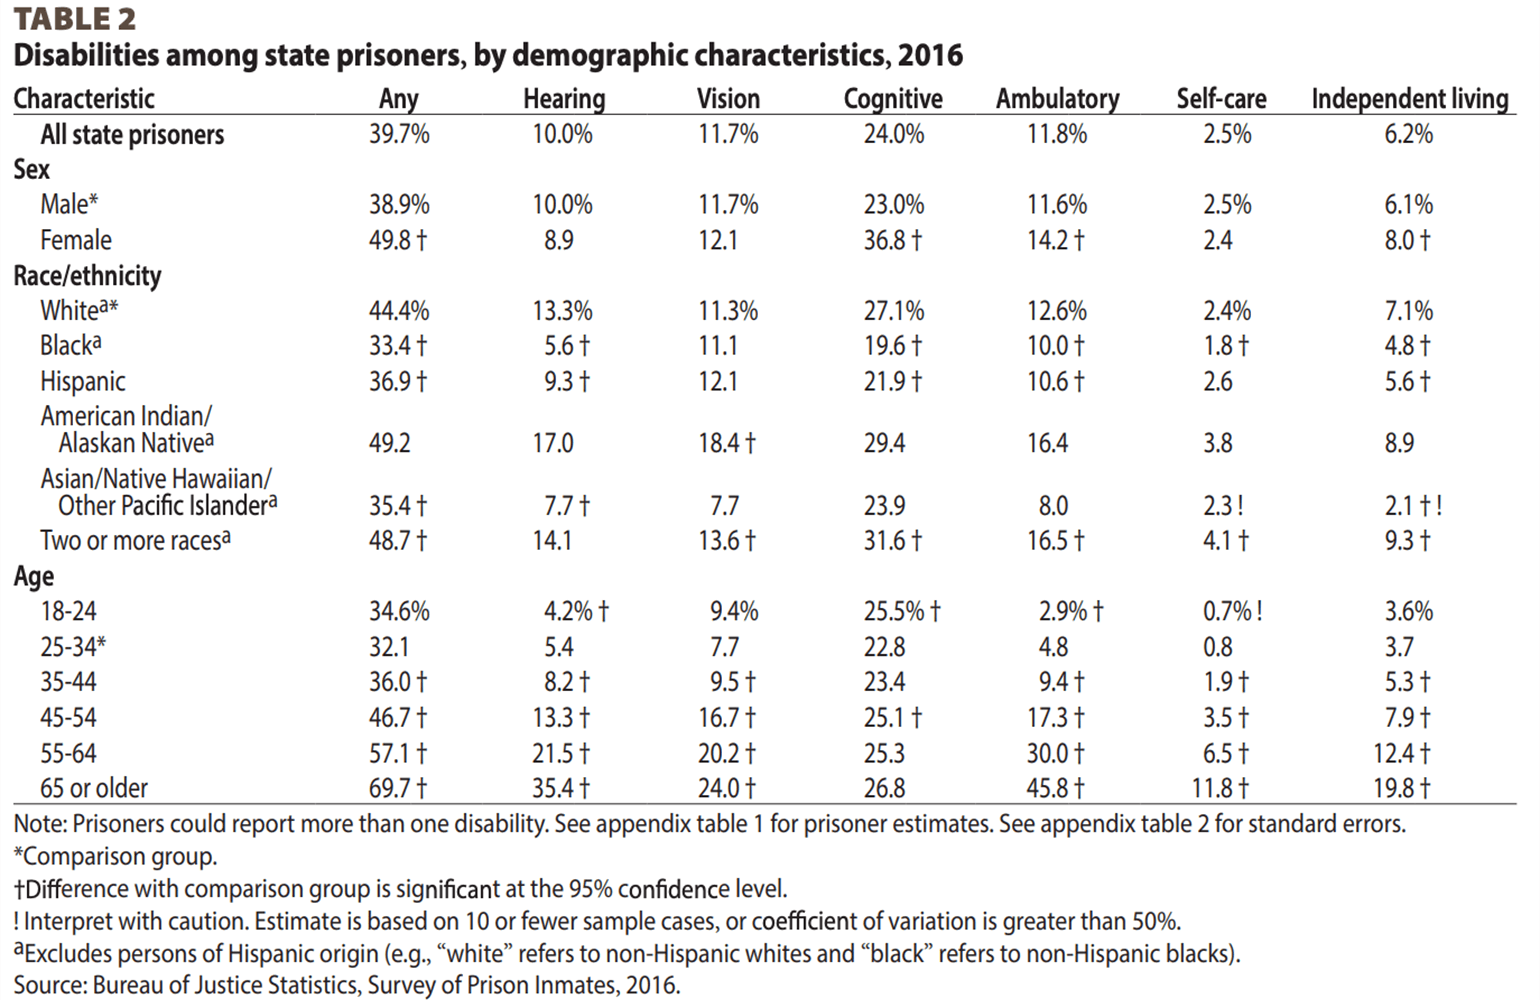 Table showing data on disabilities amongst state prisoners by demographics